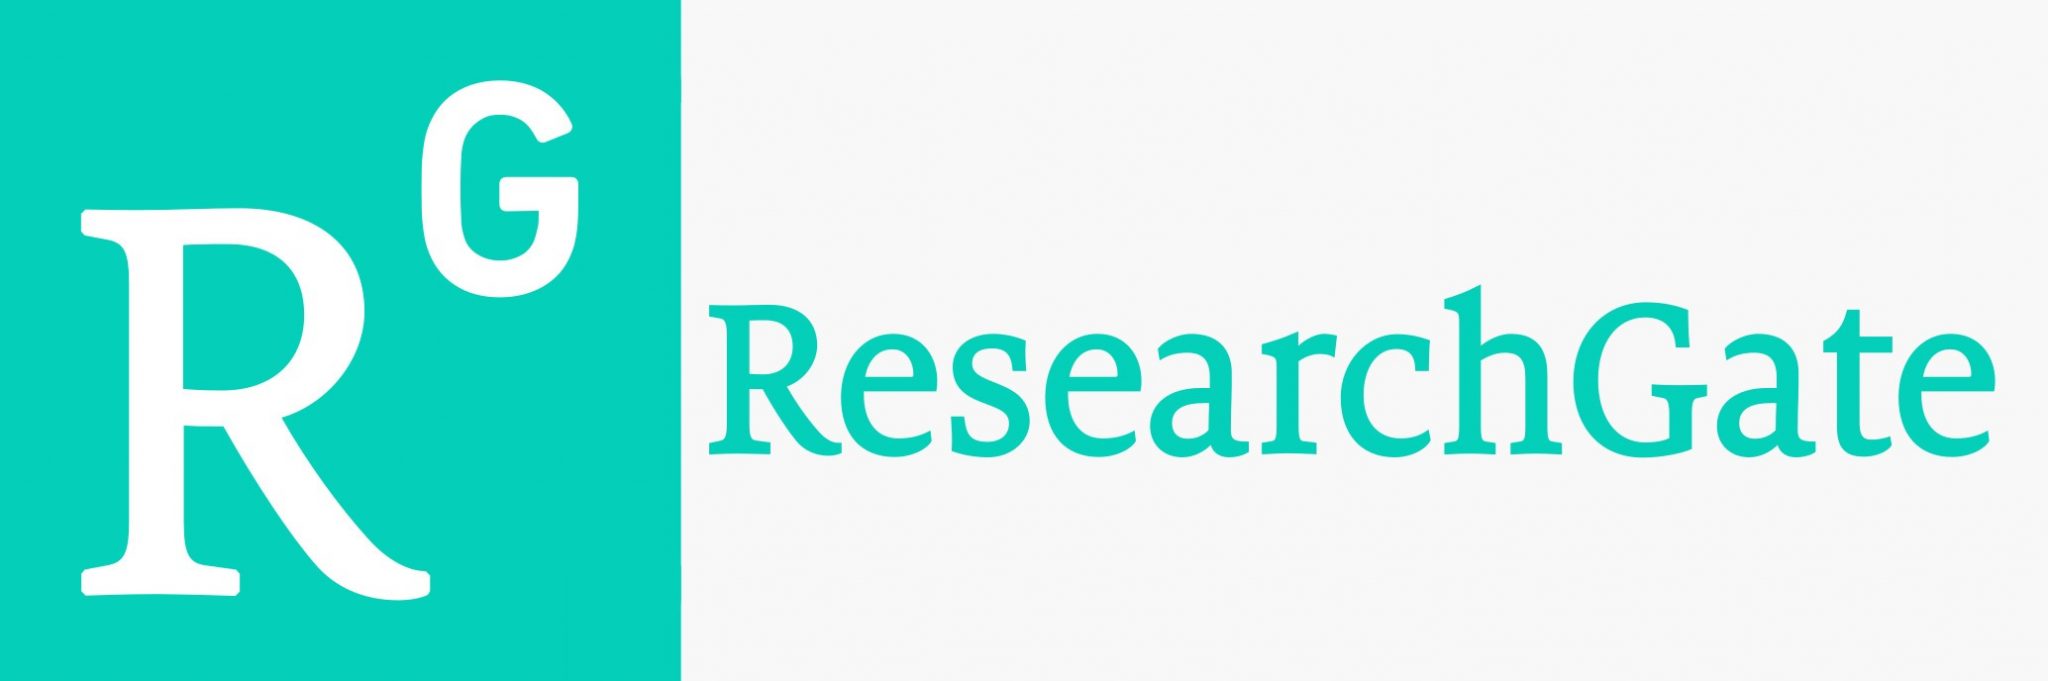 researchgate article search